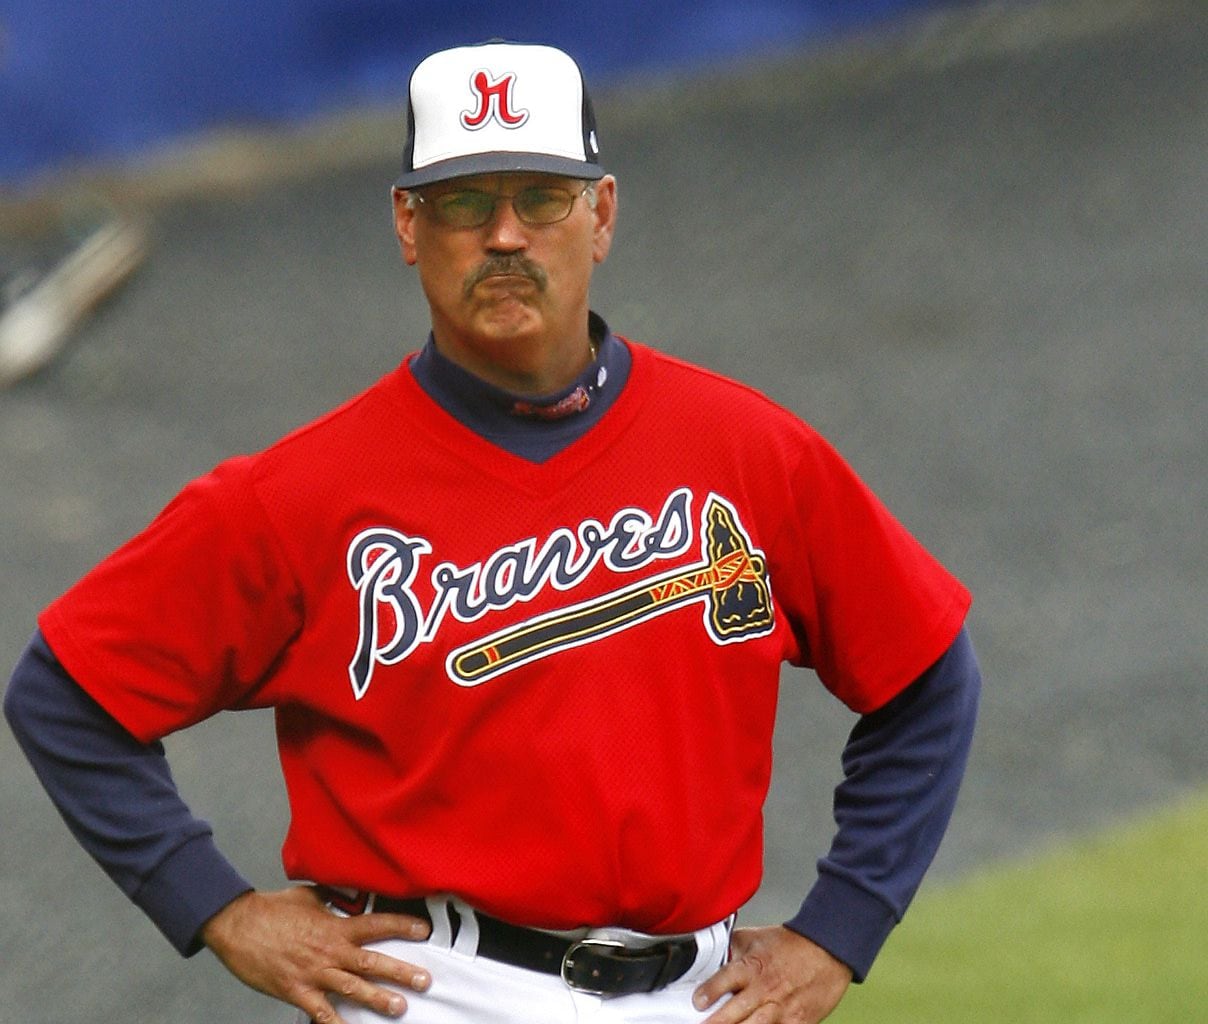 Braves manager Brian Snitker has simple mantra after 4 decades